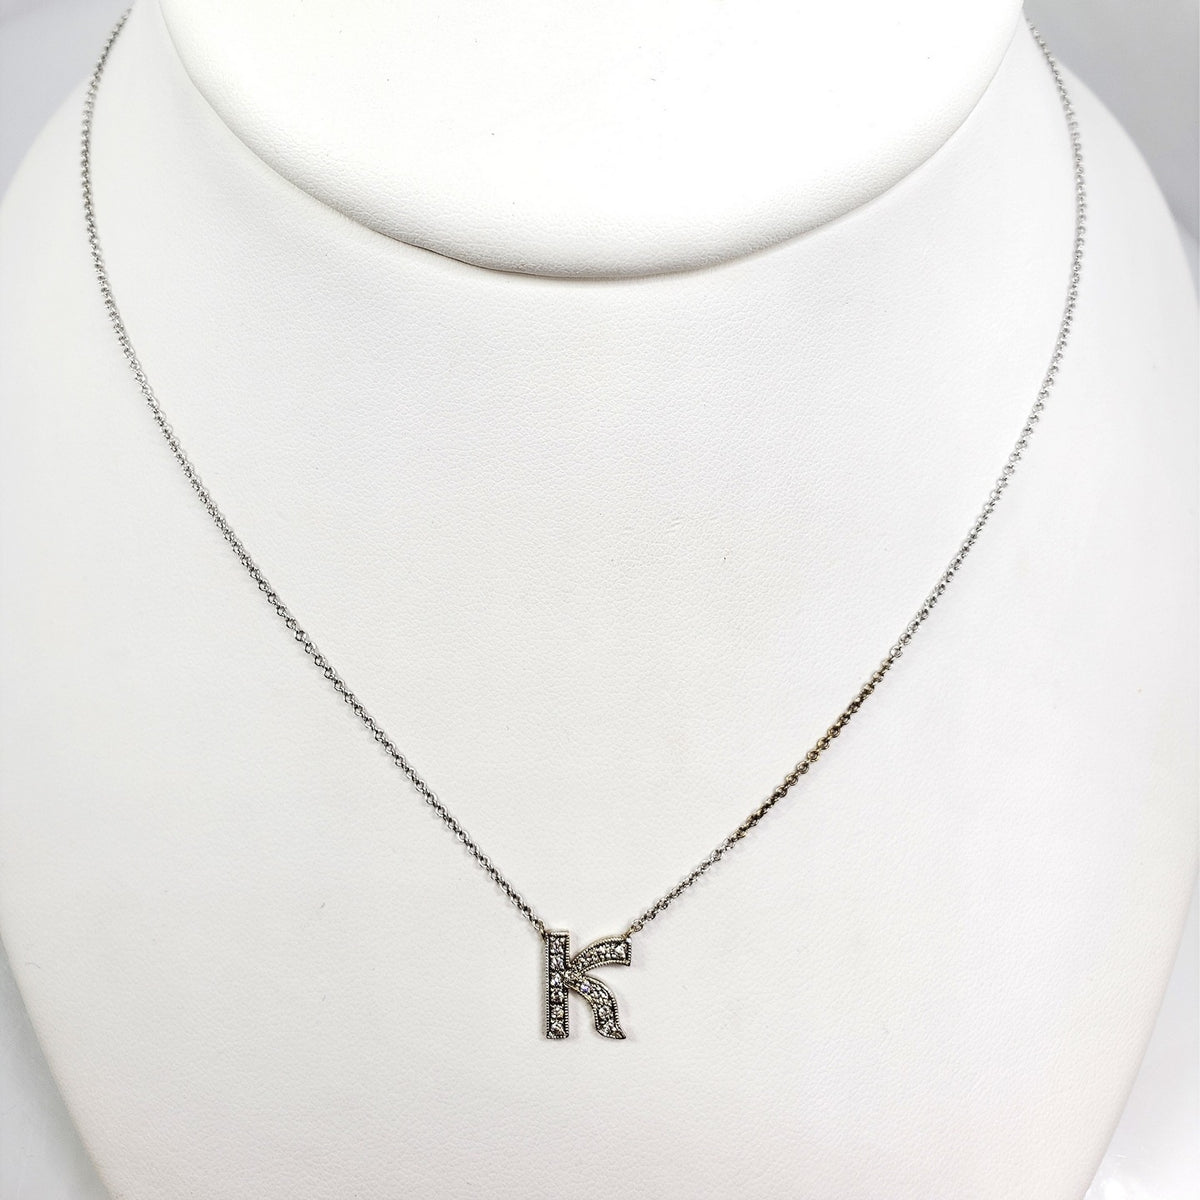 "K" Initial White Gold Diamond Pendant with Chain